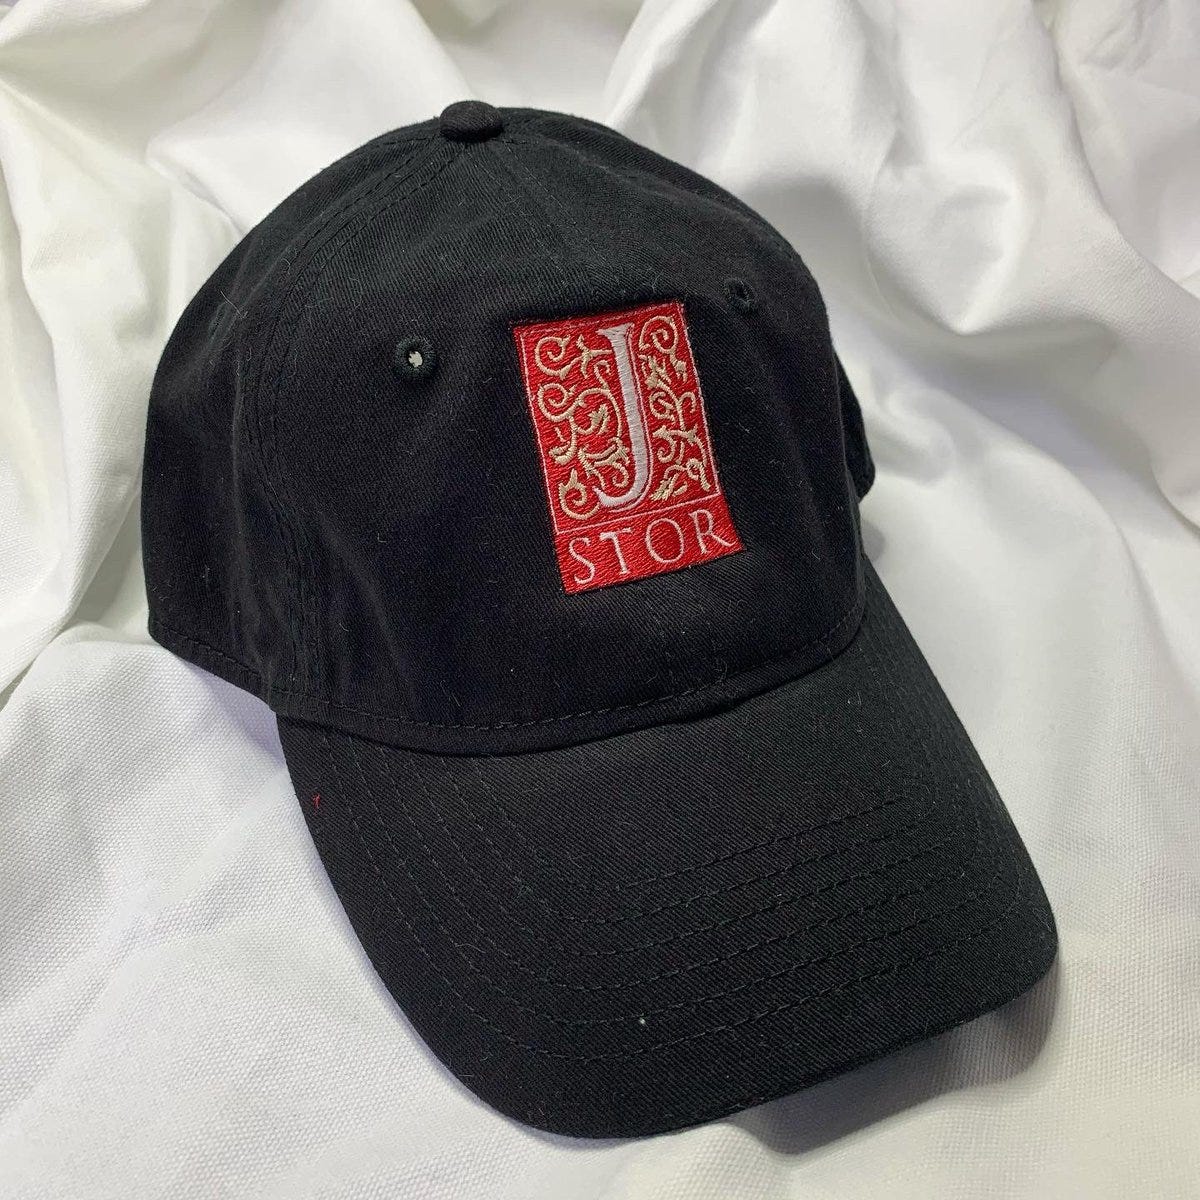 Aashish Gadani on X: "I remade the JSTOR hat because of @mxrtinli's tweet,  info on how to order on the ig post https://t.co/pTwyWhzK49  https://t.co/xFIc1ICeWa" / X